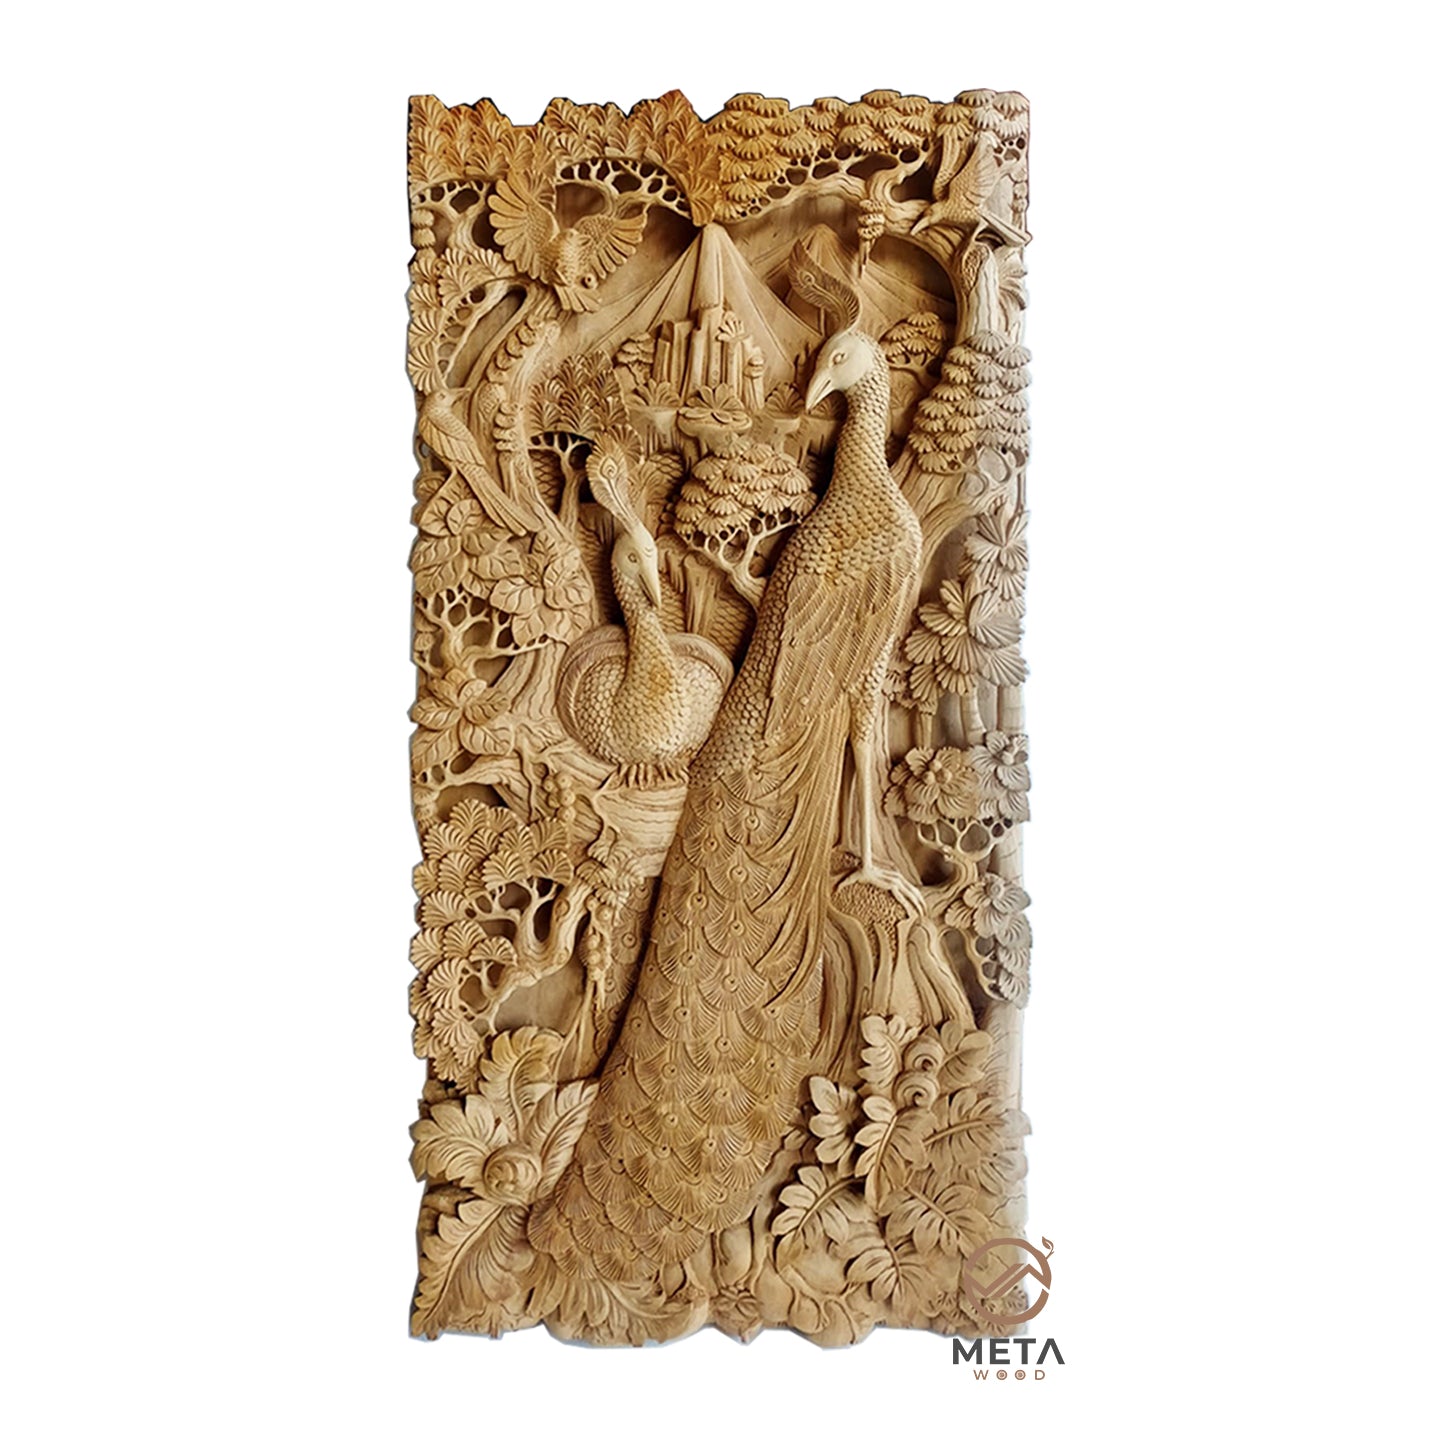 This wood carving, depicting two beautiful peacocks, is hand carved by skilled Artisans, who use traditional carving techniques to create this fine craftsmanship that will be the centerpiece of any room. Explore Meta Wood other wood art pieces. We offer an extensive selection of unique and custom wood carvings.